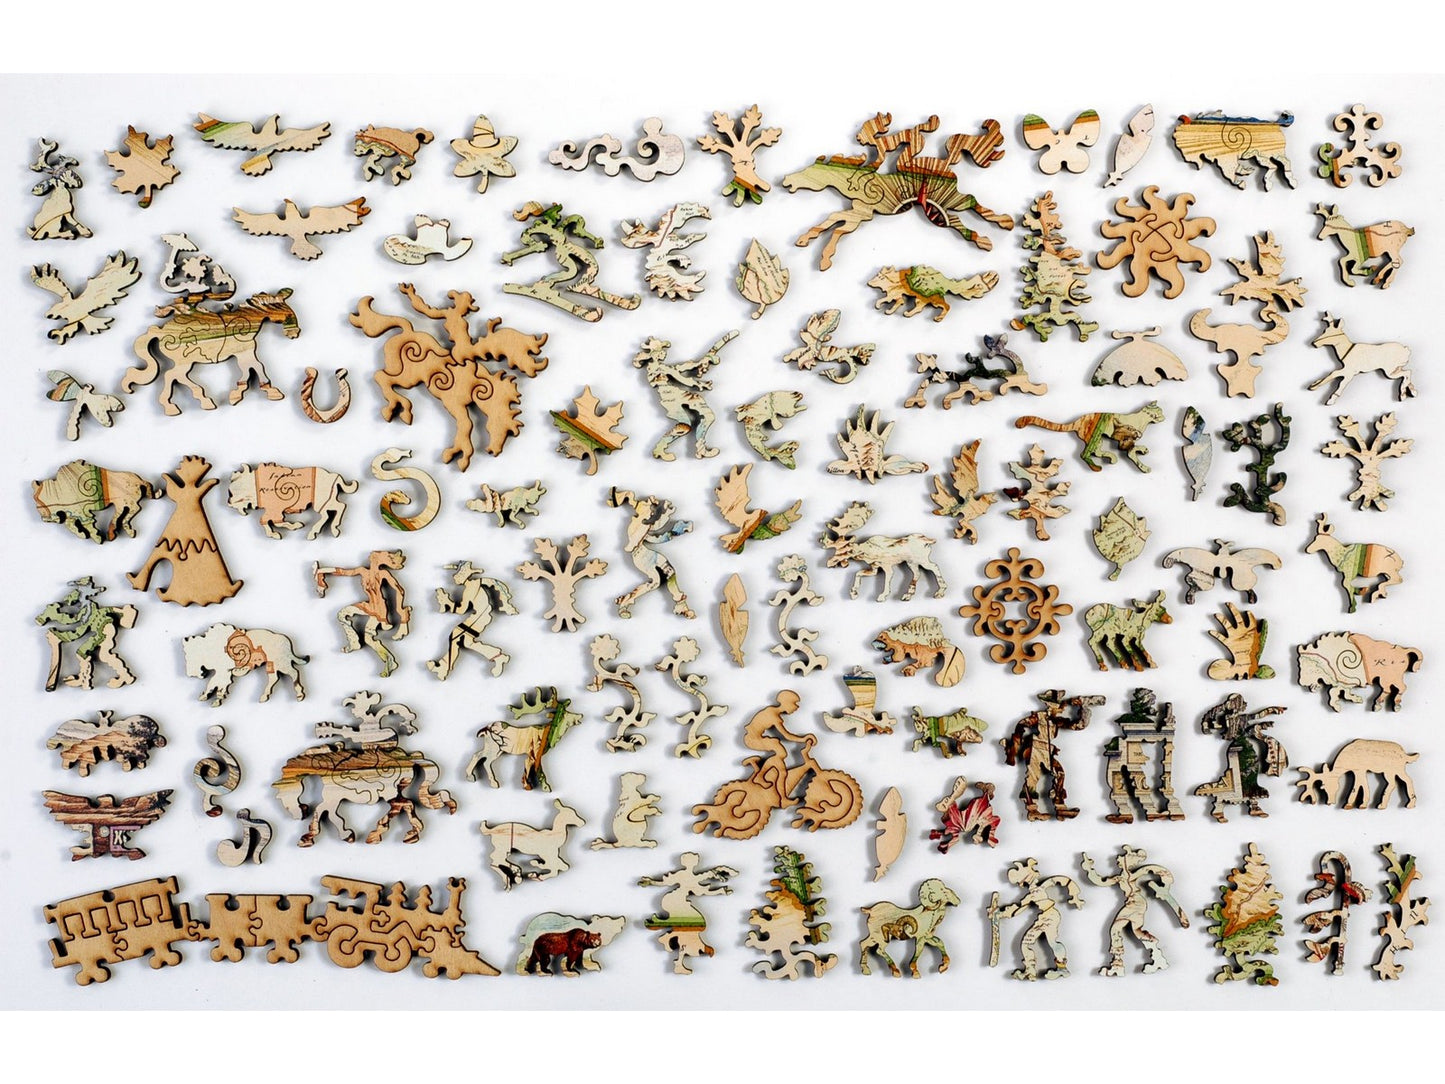 The whimsy pieces that can be found in the puzzle, Montana Map.